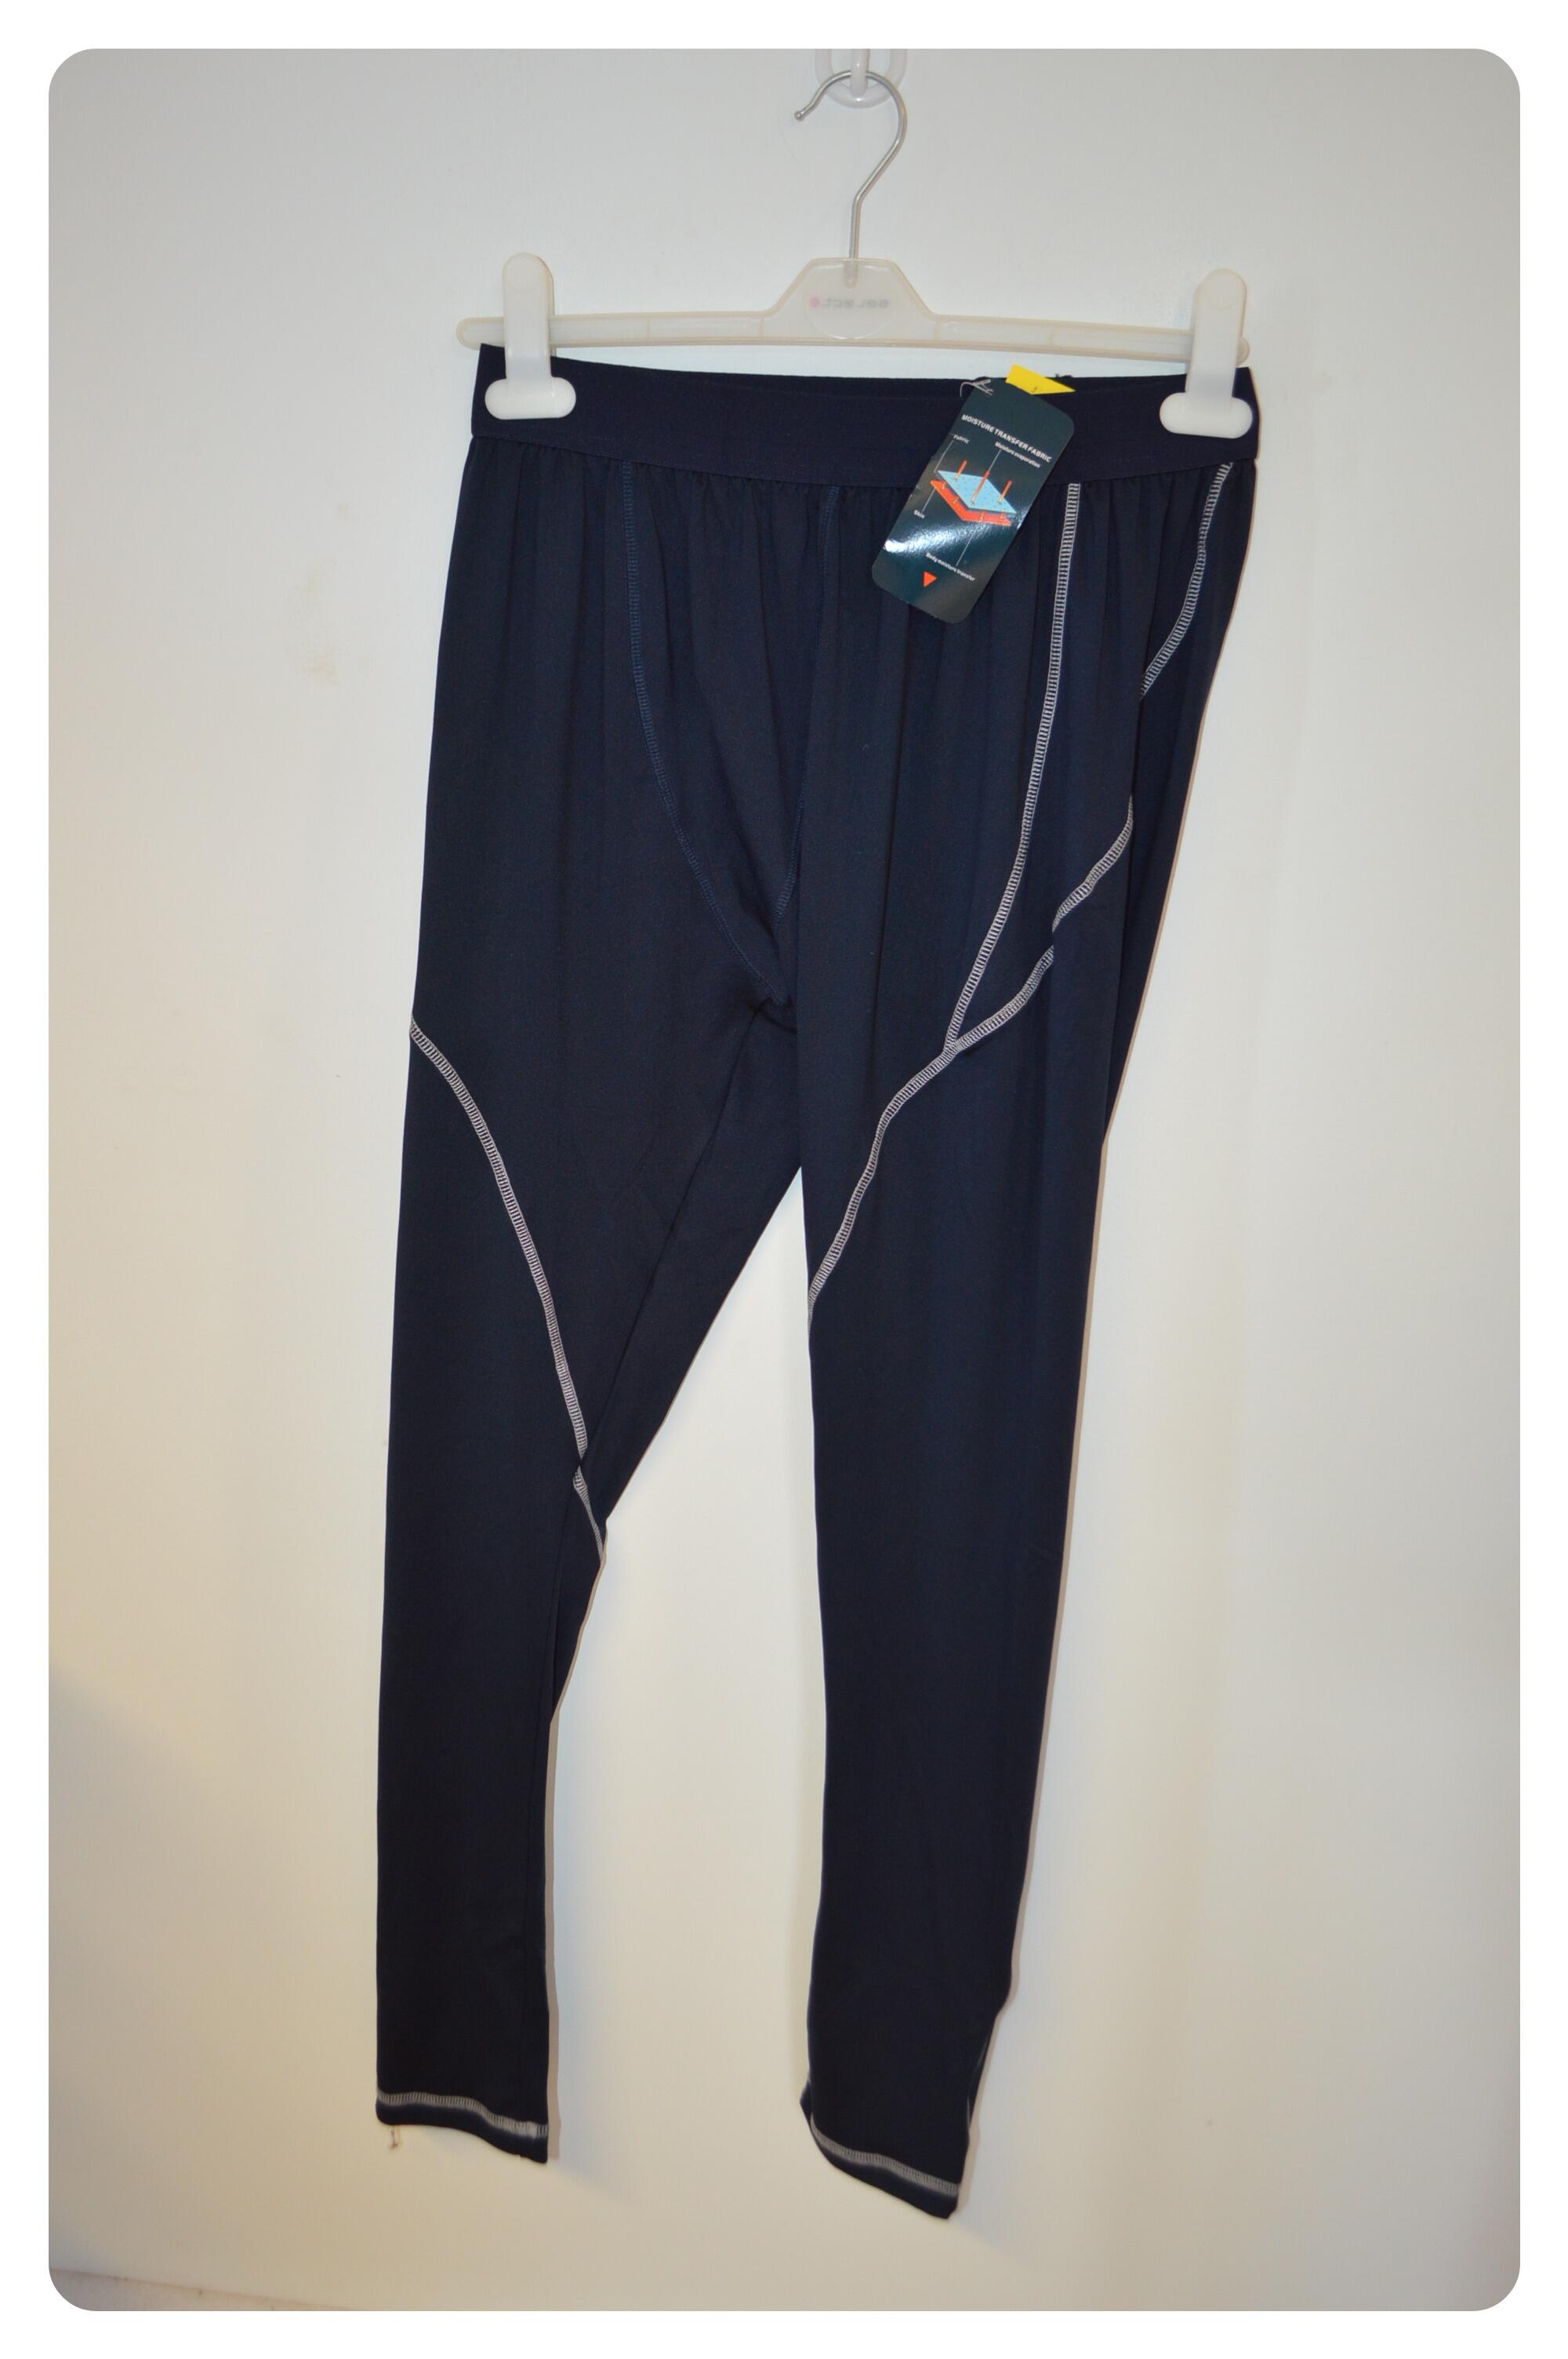 LSR41156 BNWT Thermal Compression Leggings - Small